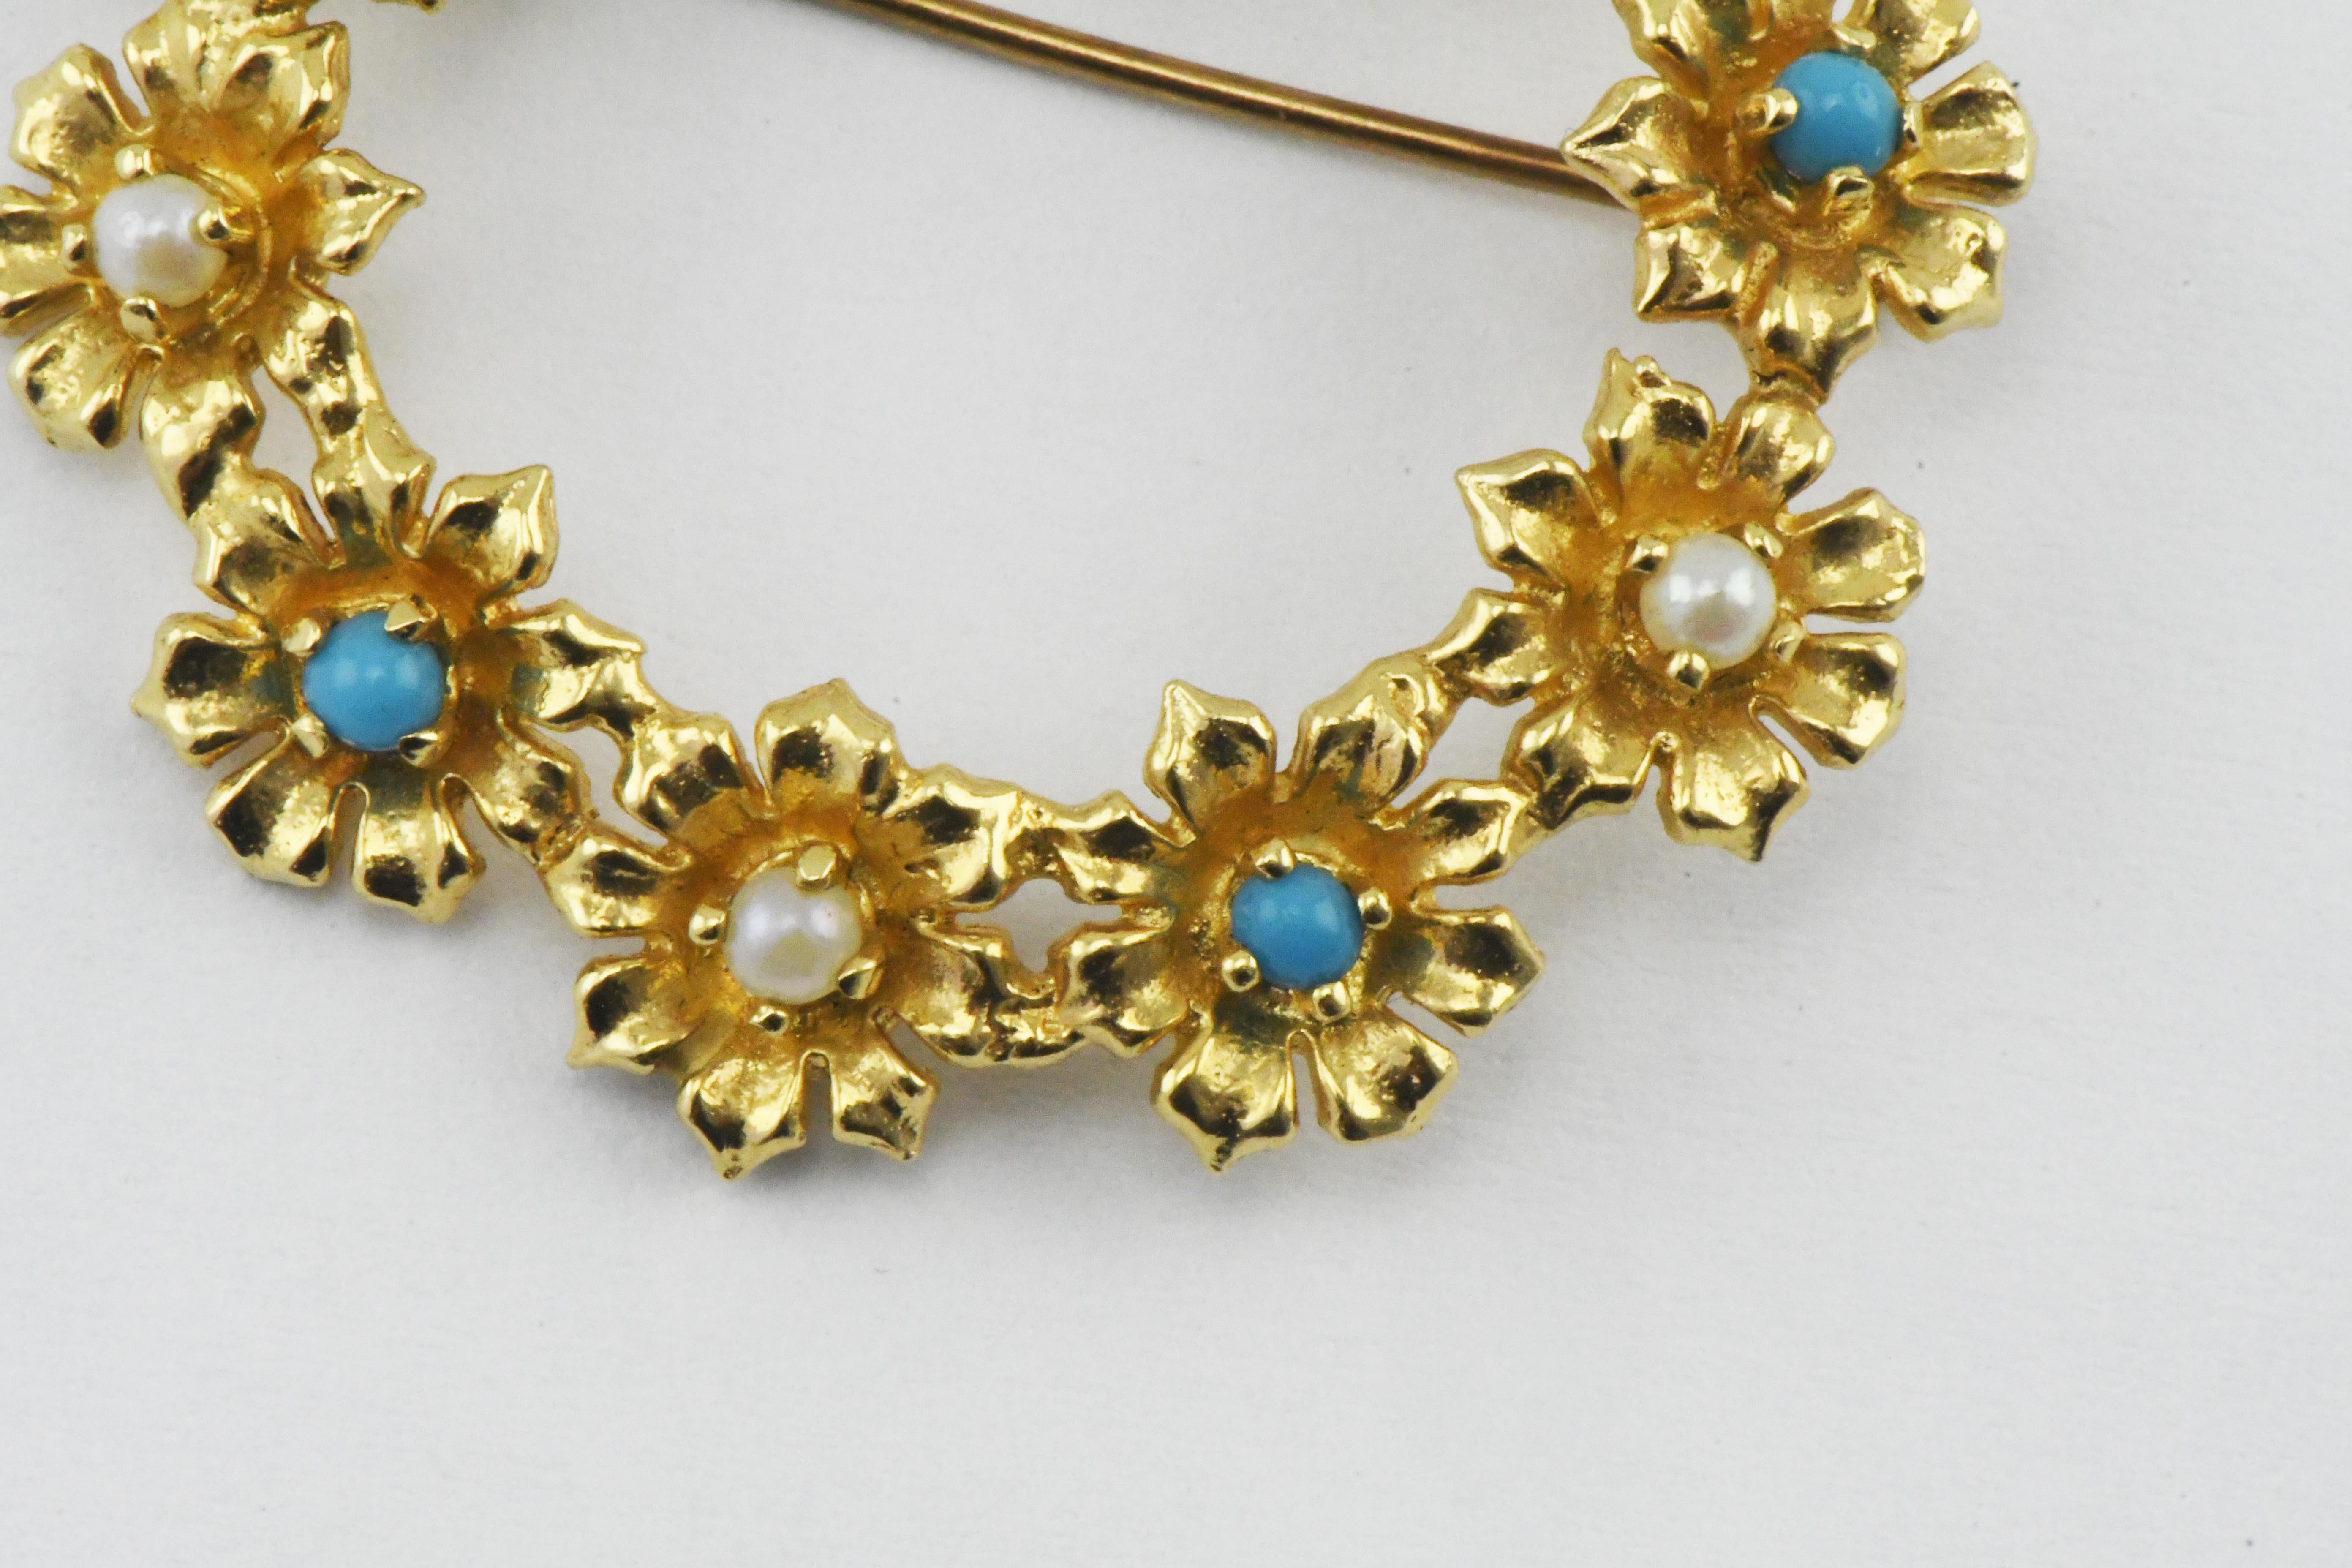 14kt Gold Flower Wreath Pin Brooch Accented with Turquoise and Pearls 7.8 grams and 1  1/2